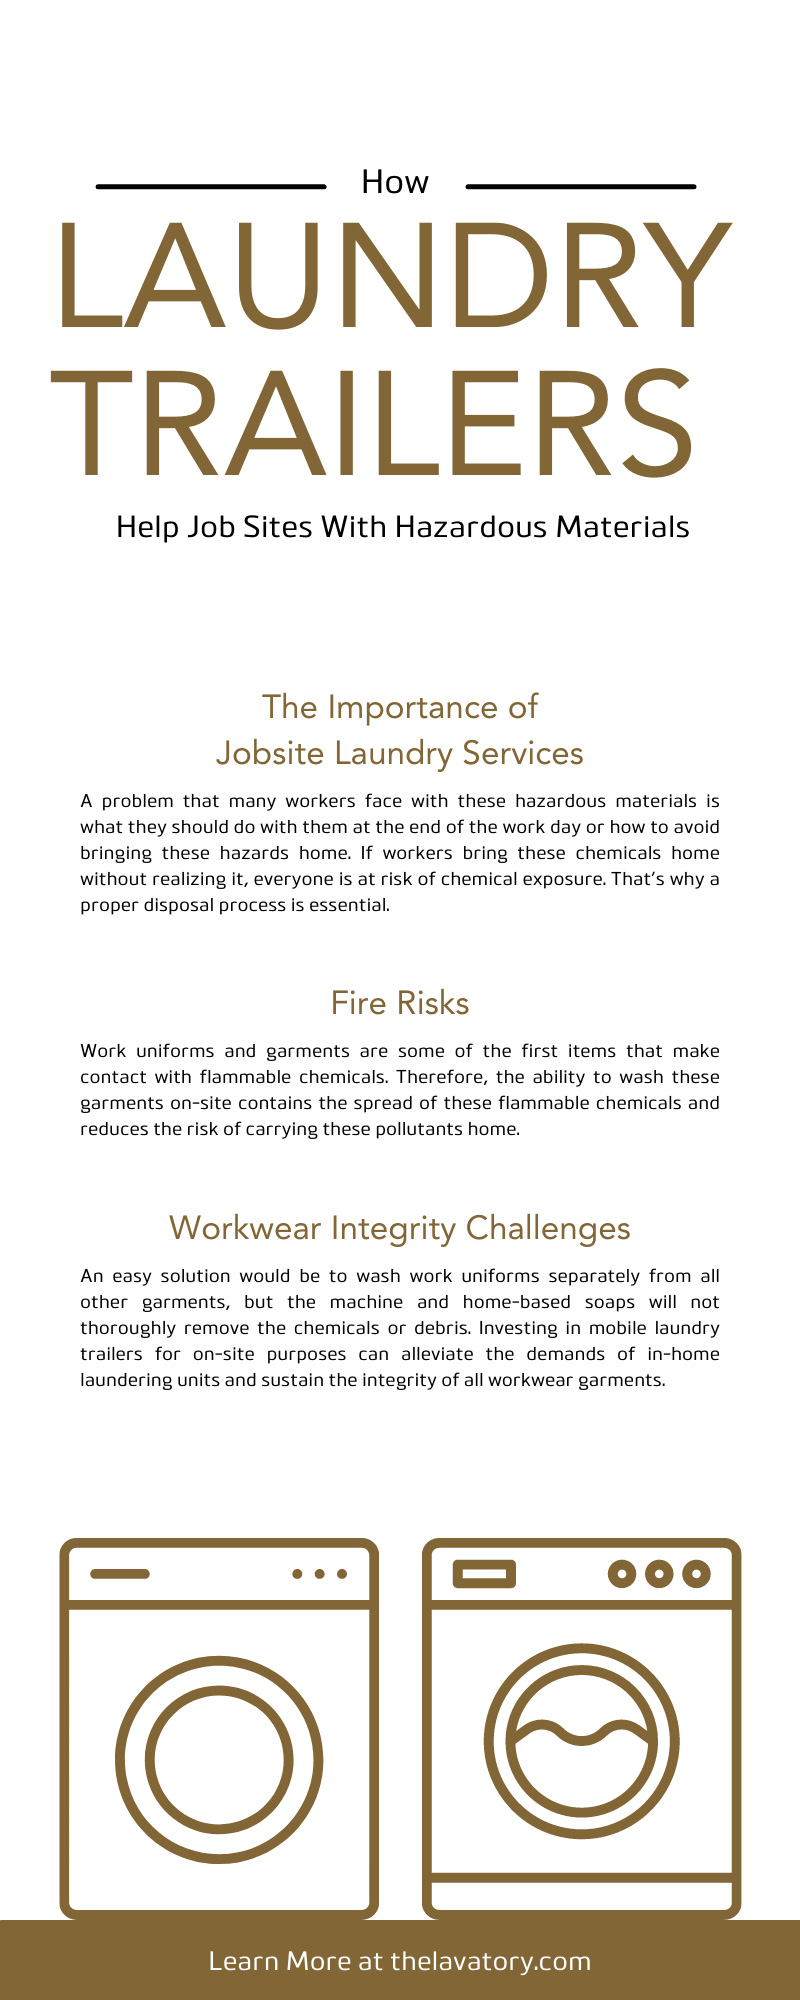 How Laundry Trailers Help Job Sites With Hazardous Materials in Fresno ...